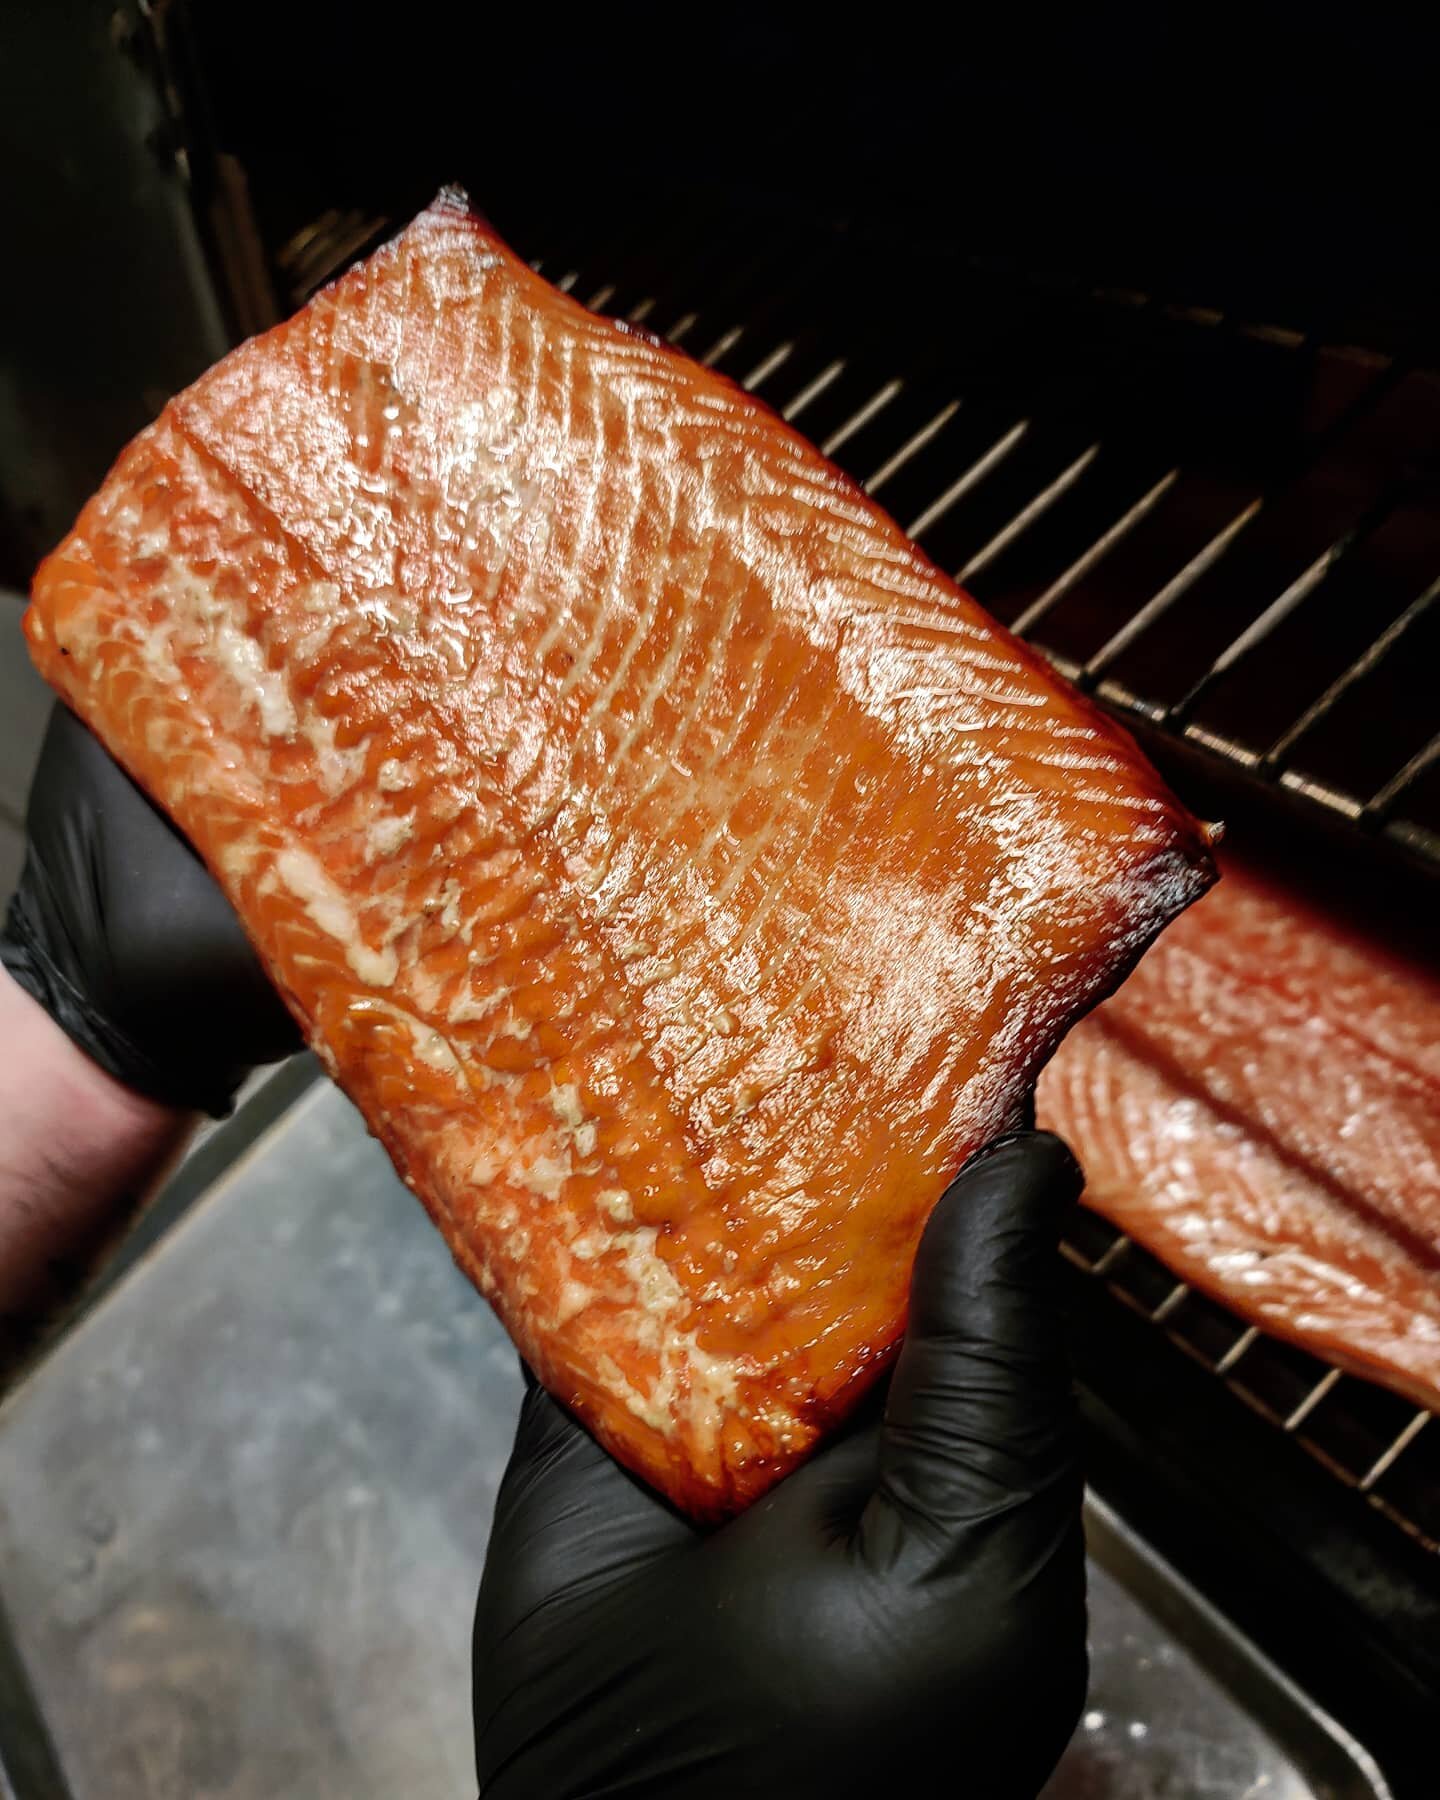 Gettin that smoker goin! House smoked salmon from @kvaroyarctic is probably the best smoked salmon you'll ever eat. It's landing atop a gorgeous salad with greens, miso mayo, fennel, grapefruit, and cornbread crumble. Cheers!
.
.
.
.
.
.
.
.
.
.
.
.
